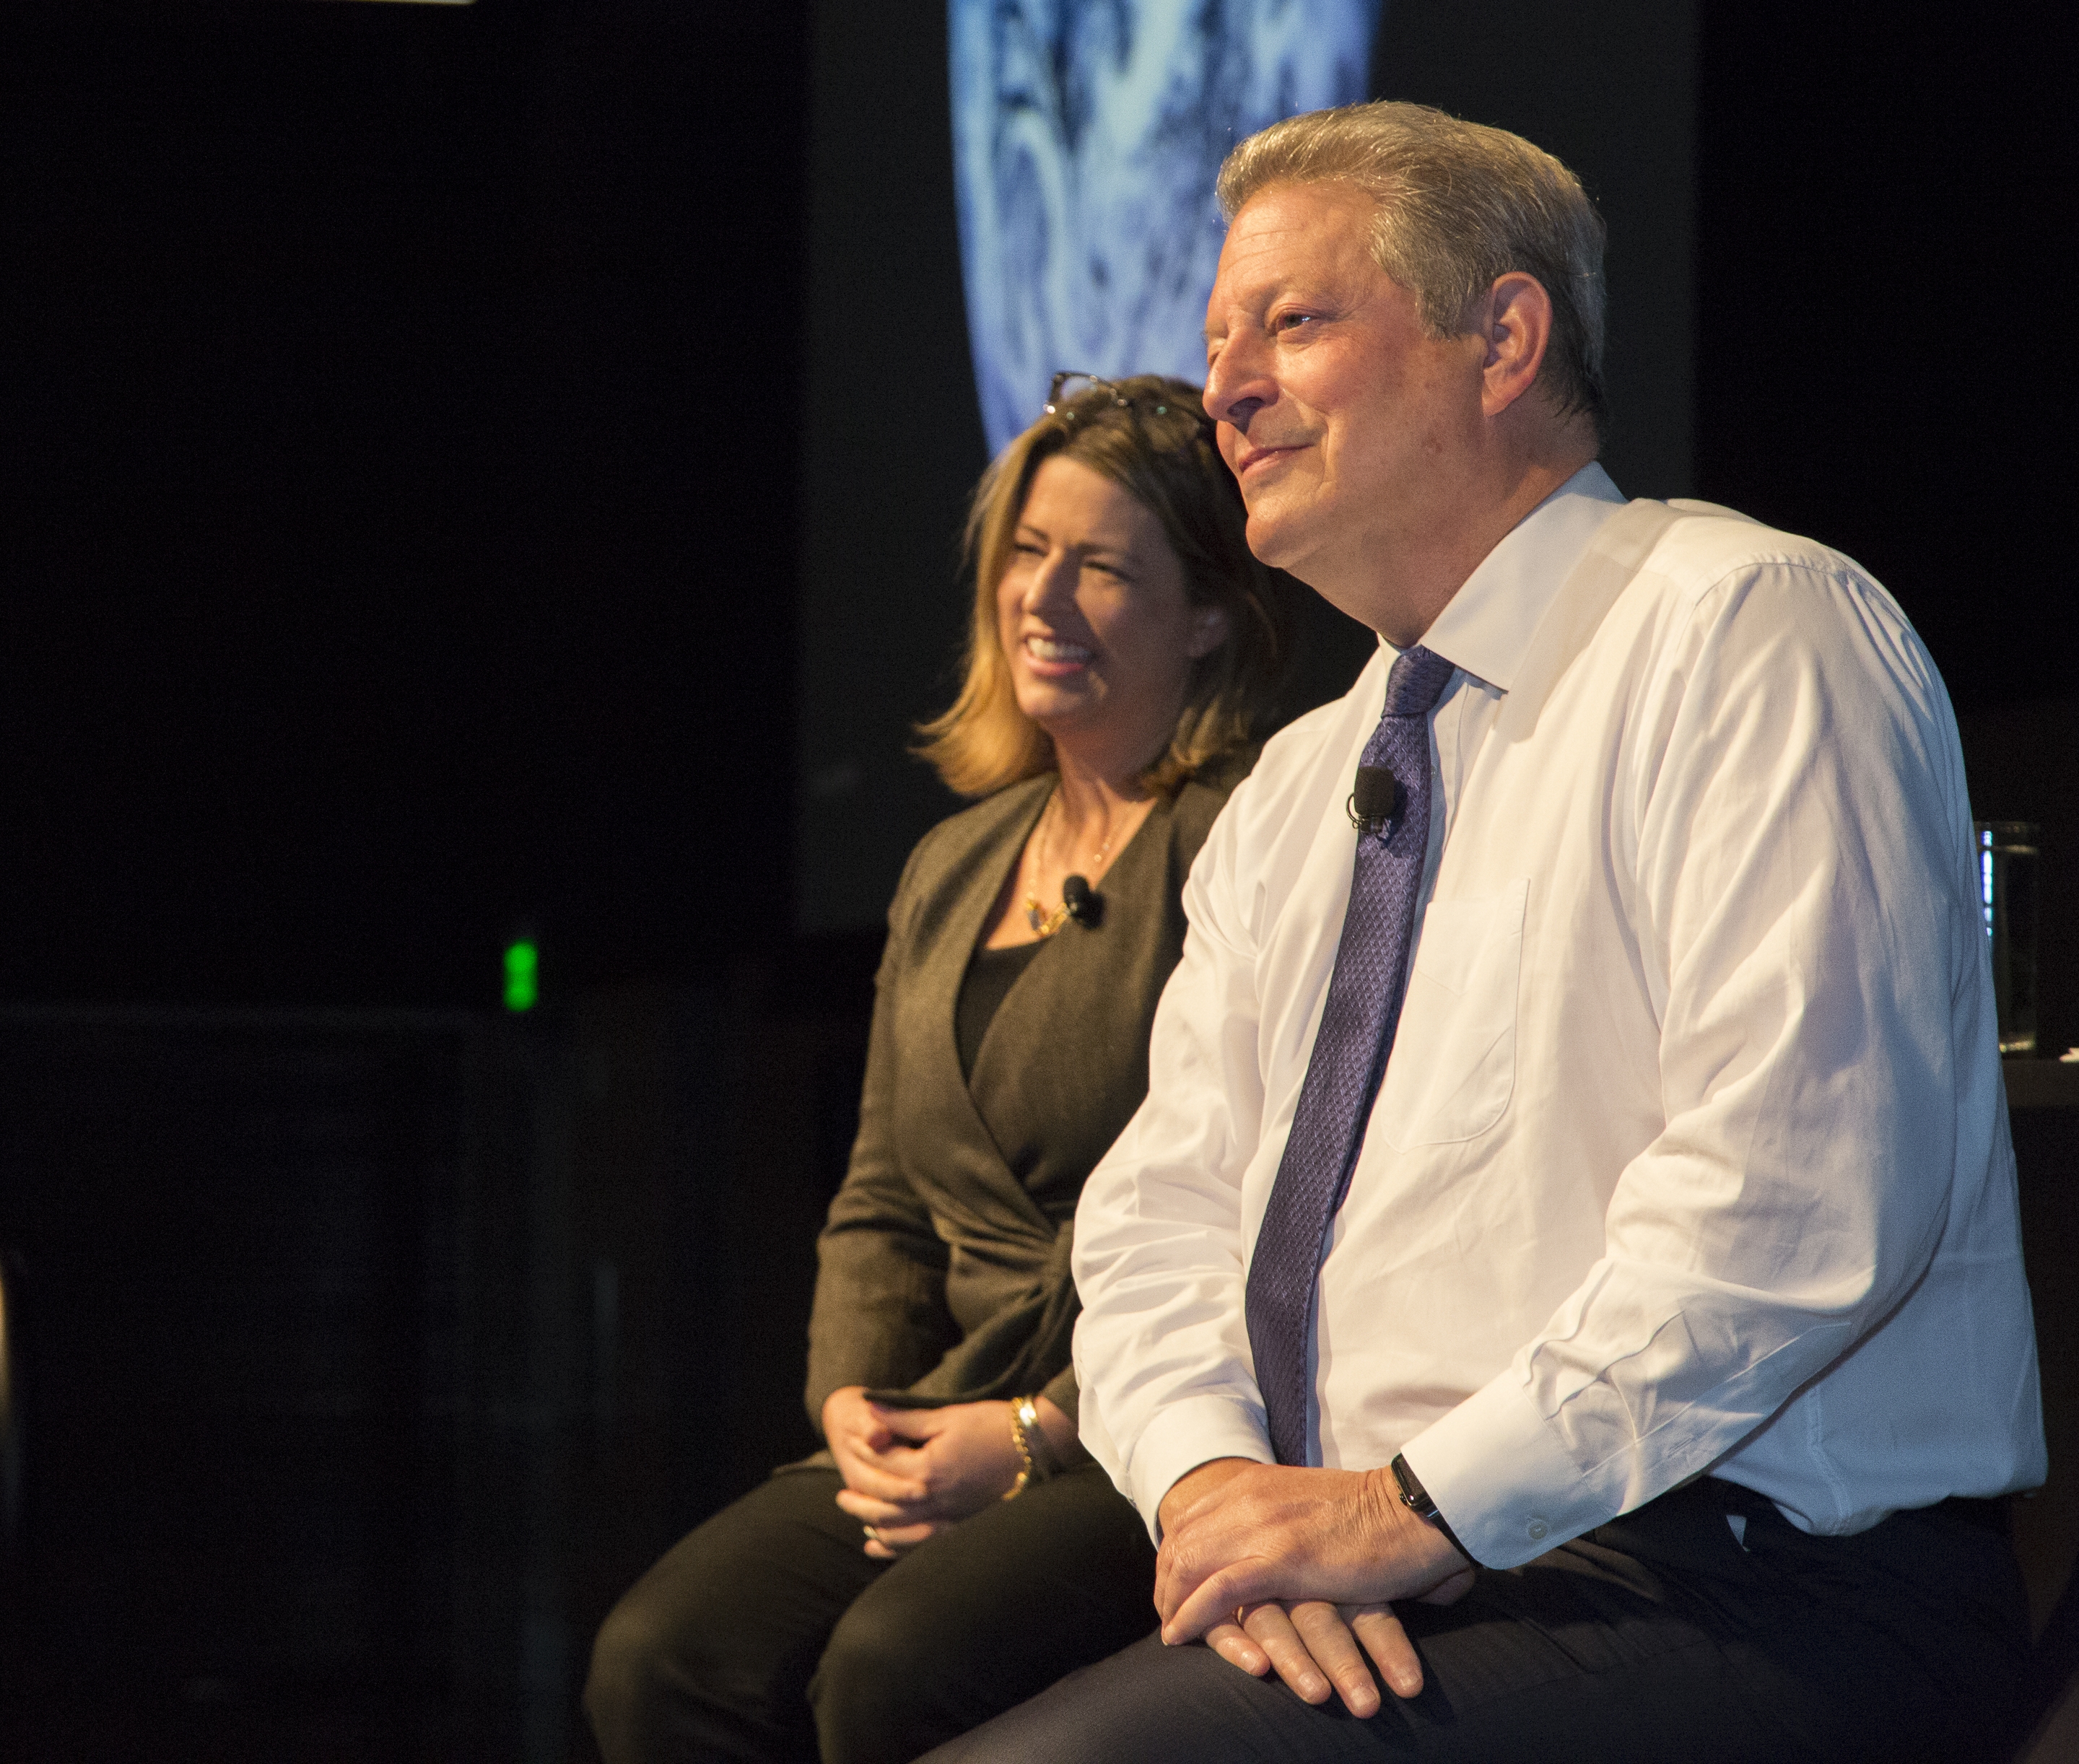 Amazon Director of Sustainability Kara Hurst (L) and Vice President Al Gore on stage at Amazon